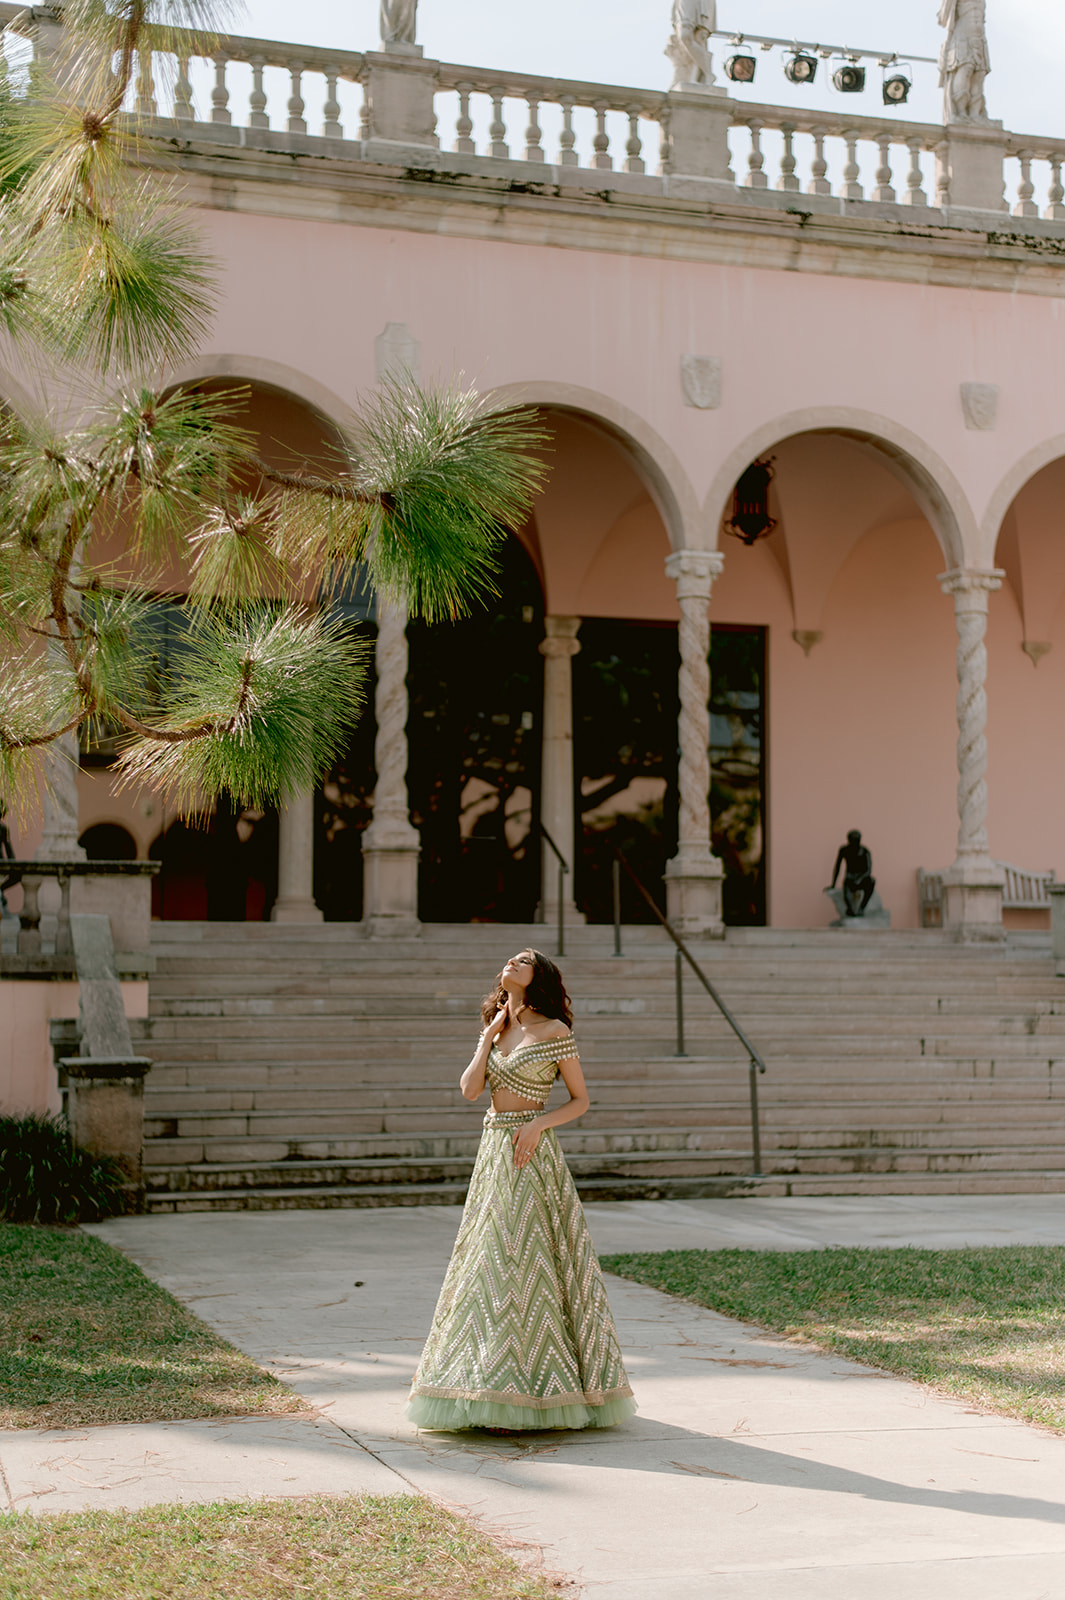 "Indian couple posing in front of the Ca' d'Zan mansion at the Ringling Museum"
